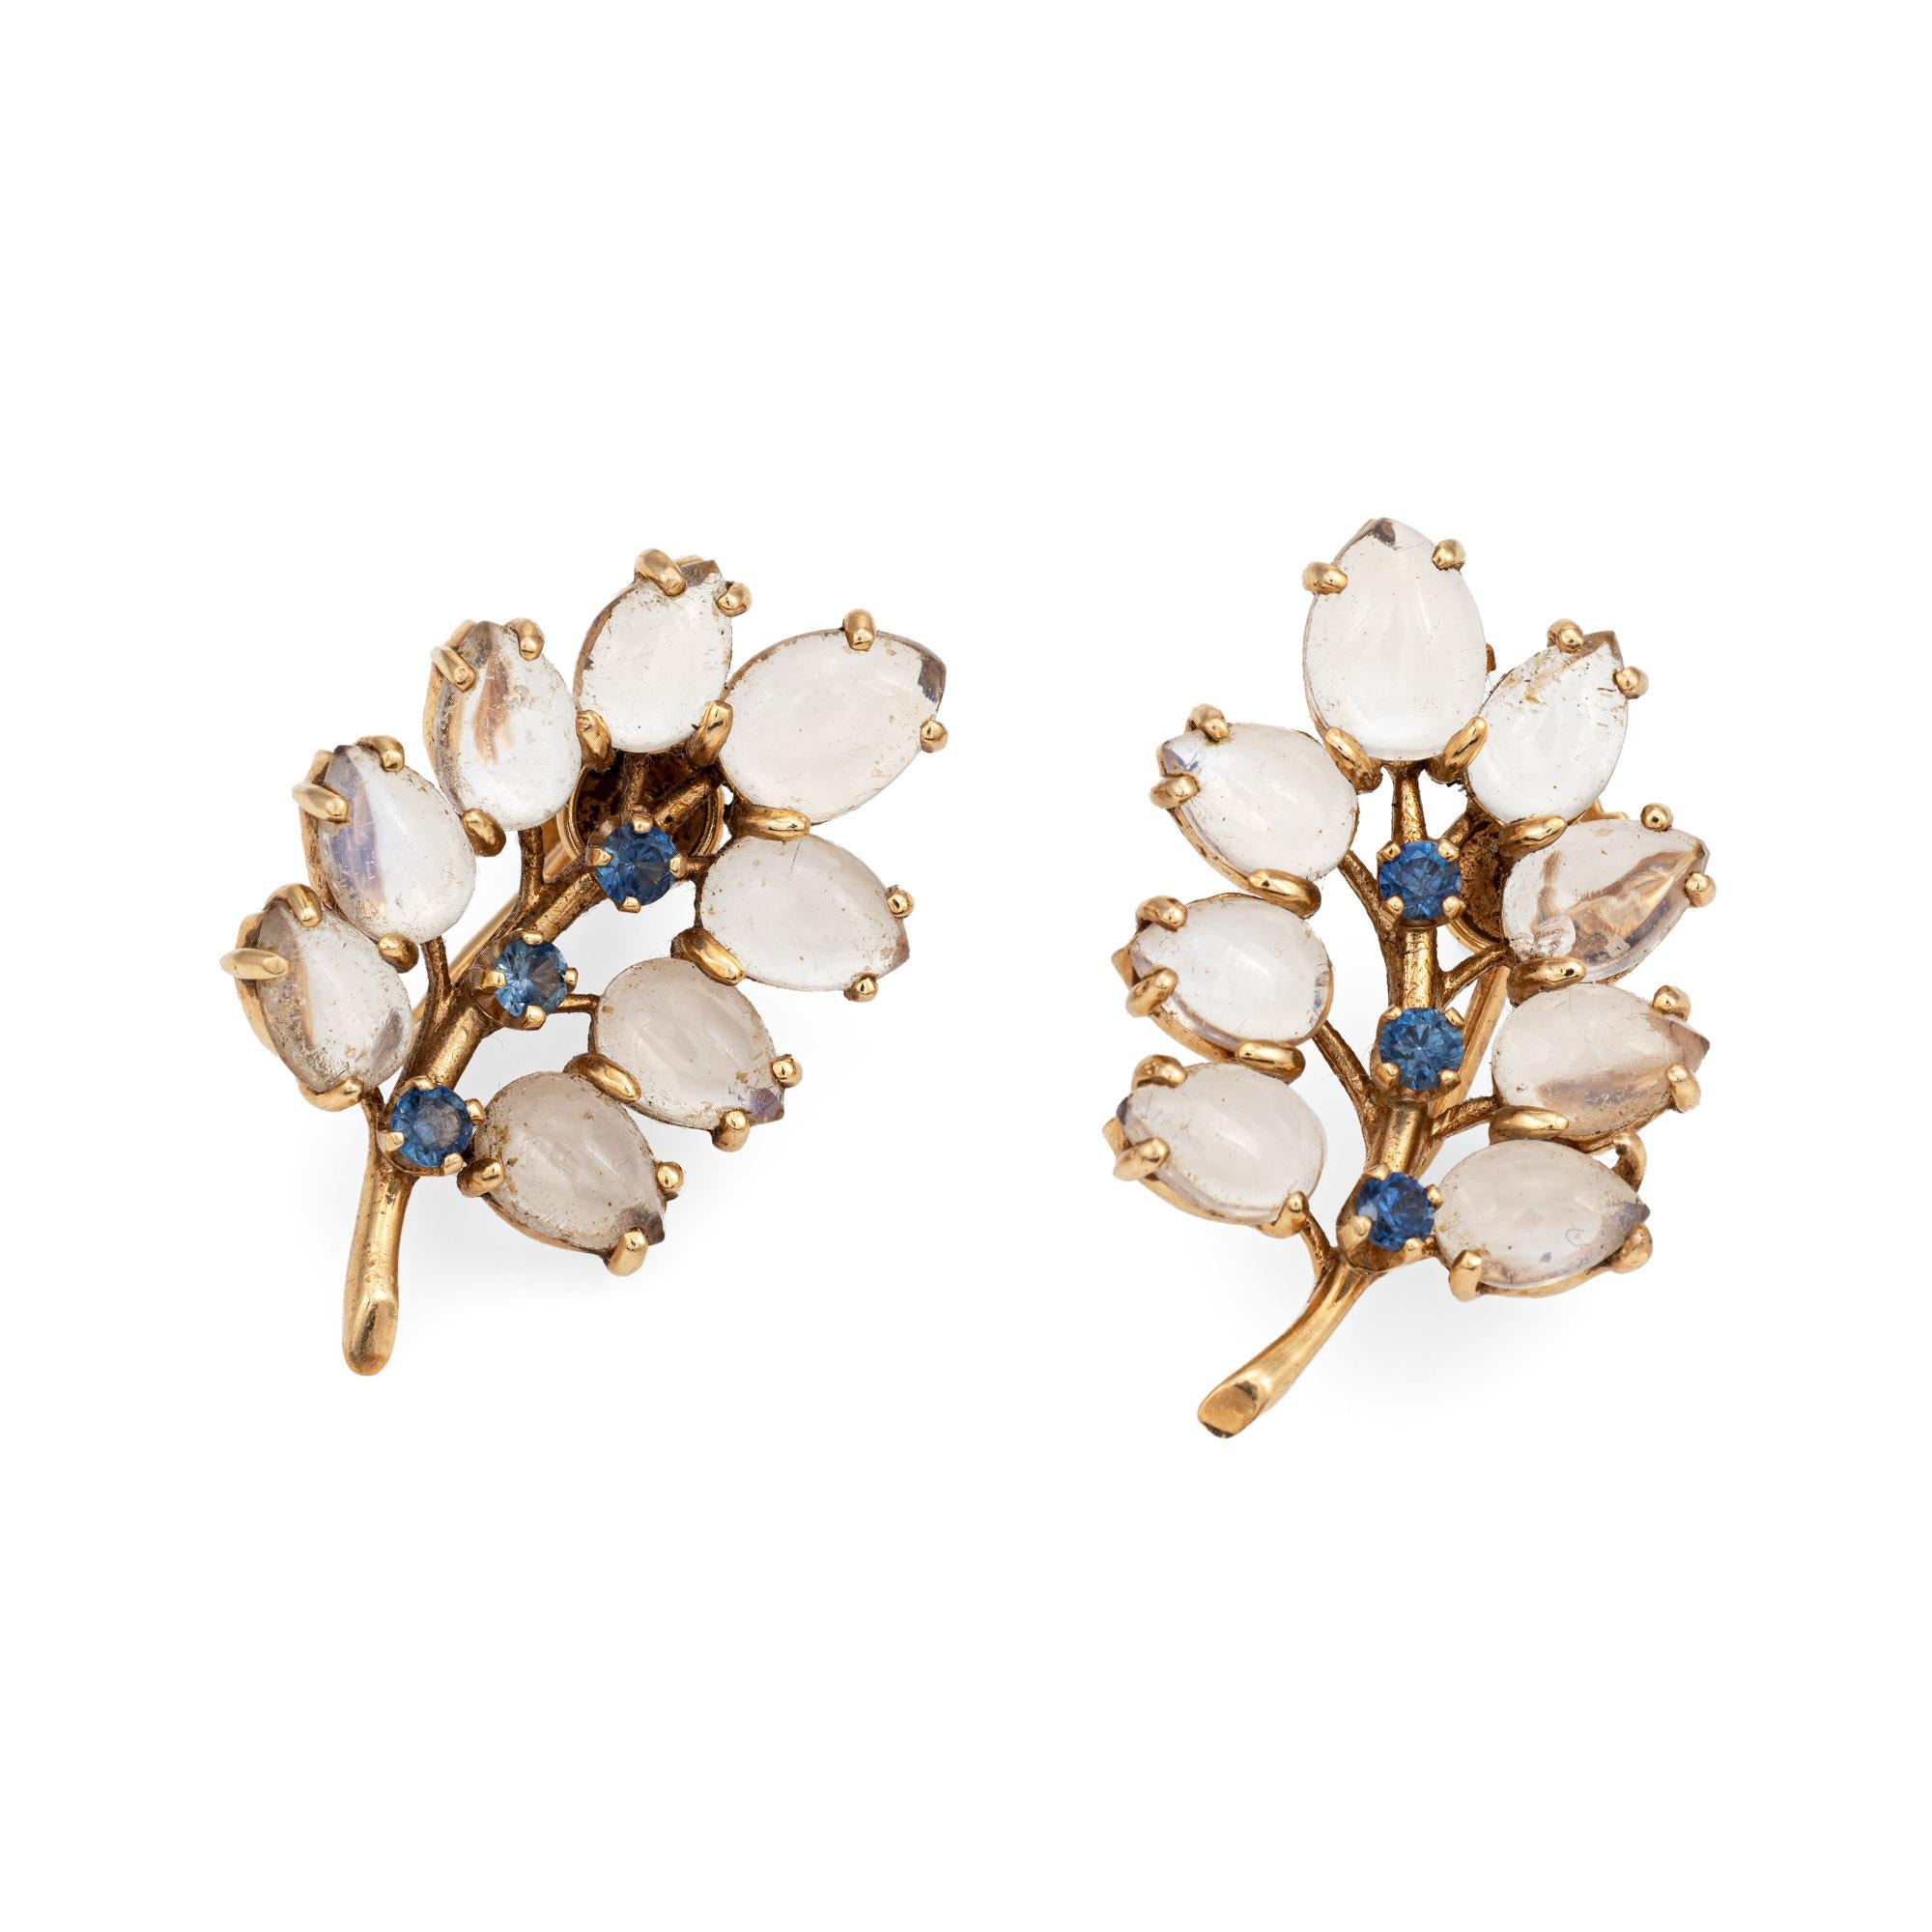 Stylish pair of vintage Wordley, Allsopp & Bliss moonstone earrings crafted in 14k yellow (circa 1940s). 

16 cabochon cut moonstones range in size from 6mm x 4mm and 7mm x 5mm.  Six cornflower bllue sapphires total an estimated 0.12 carats. The